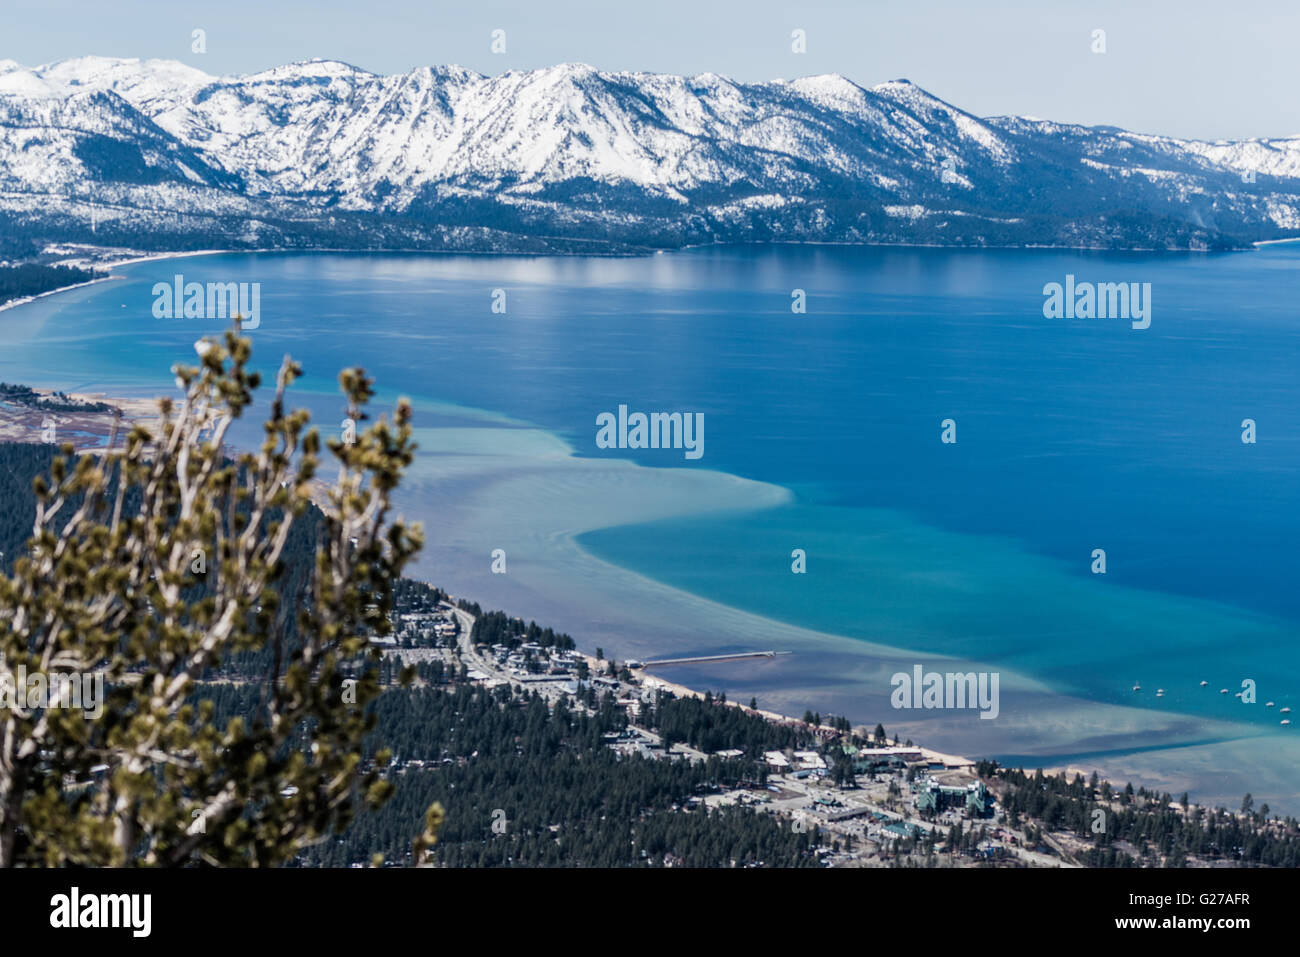 Lake Tahoe Mountain Banque D'Images